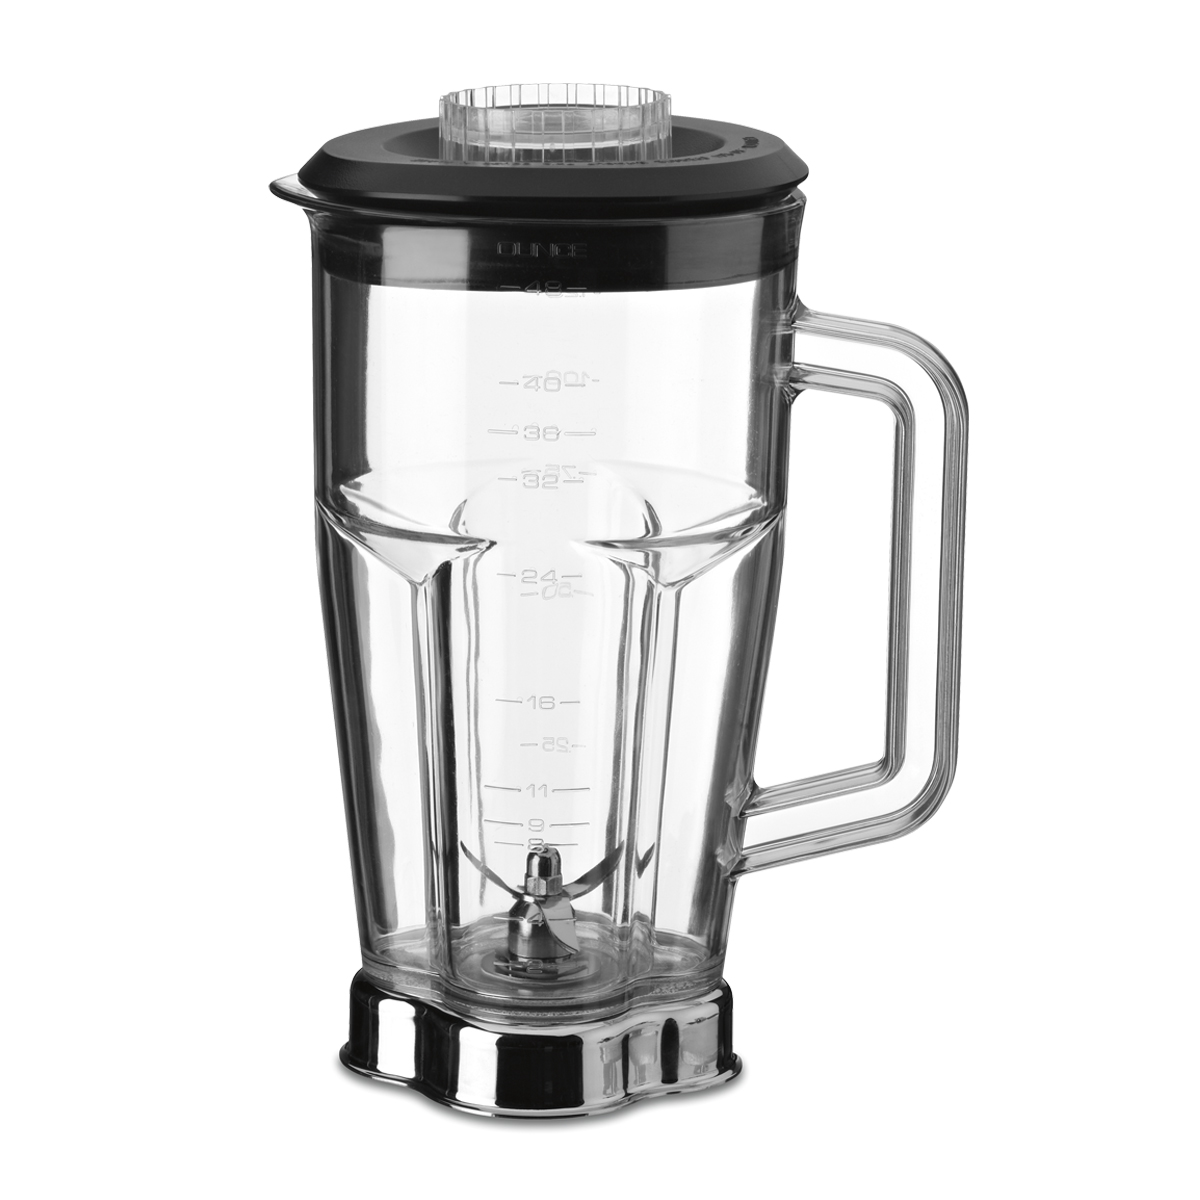 https://www.waringcommercialproducts.com/files/accessories/cac19-blender-container-with-blade-lid.jpg